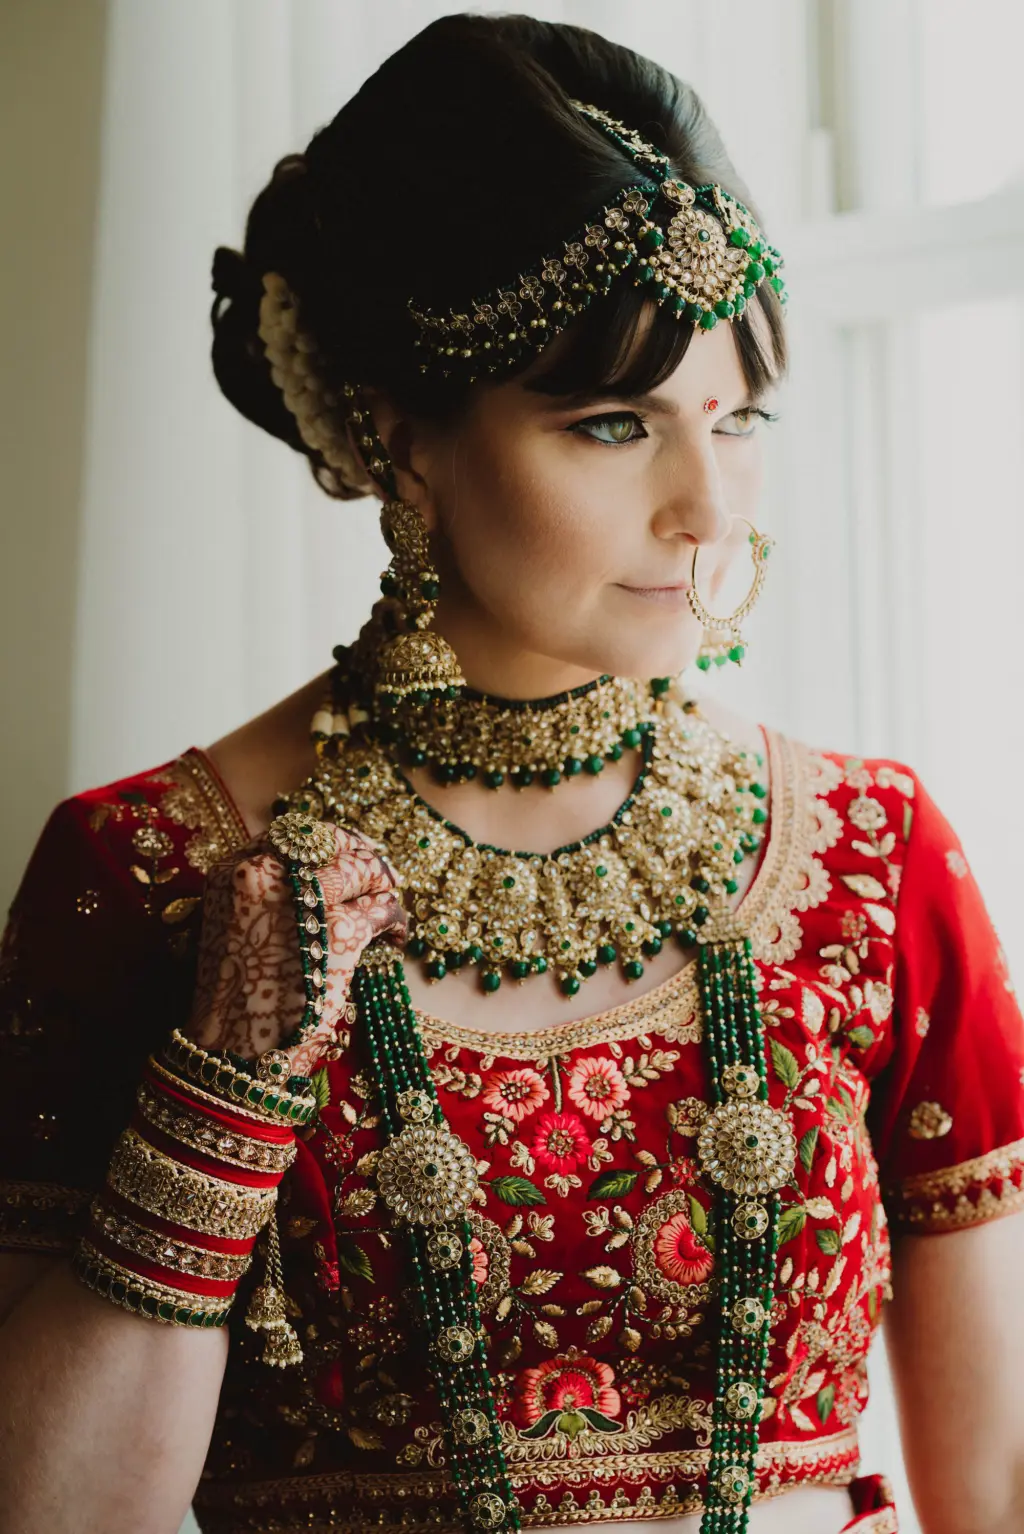 Indian Bride Getting Ready Wedding Portrait | Tampa Bay Hair and Makeup Artist Michele Renee The Studio | Photographer and Videographer Mars and The Moon Films